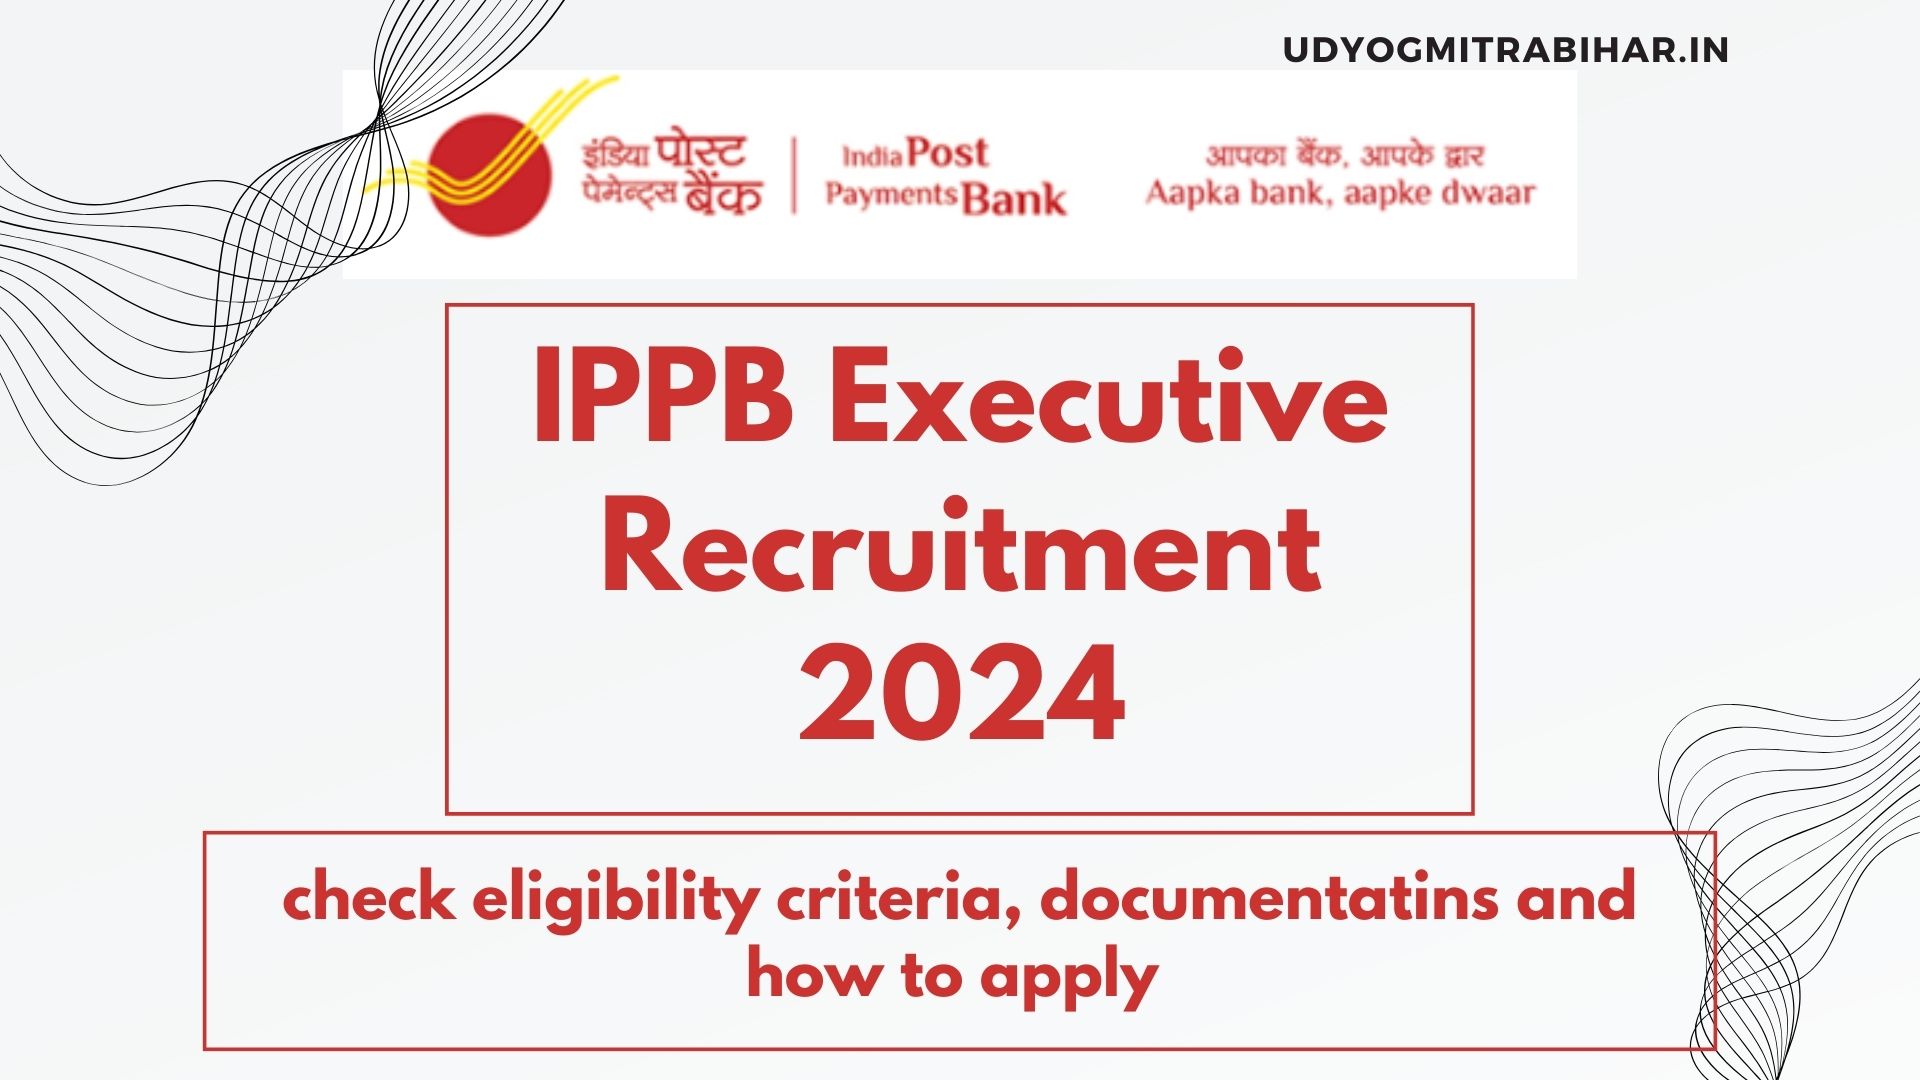 IPPB Information Technology Executive Recruitment 2024 for 54 Posts, Eligibility, Application Process, Salary